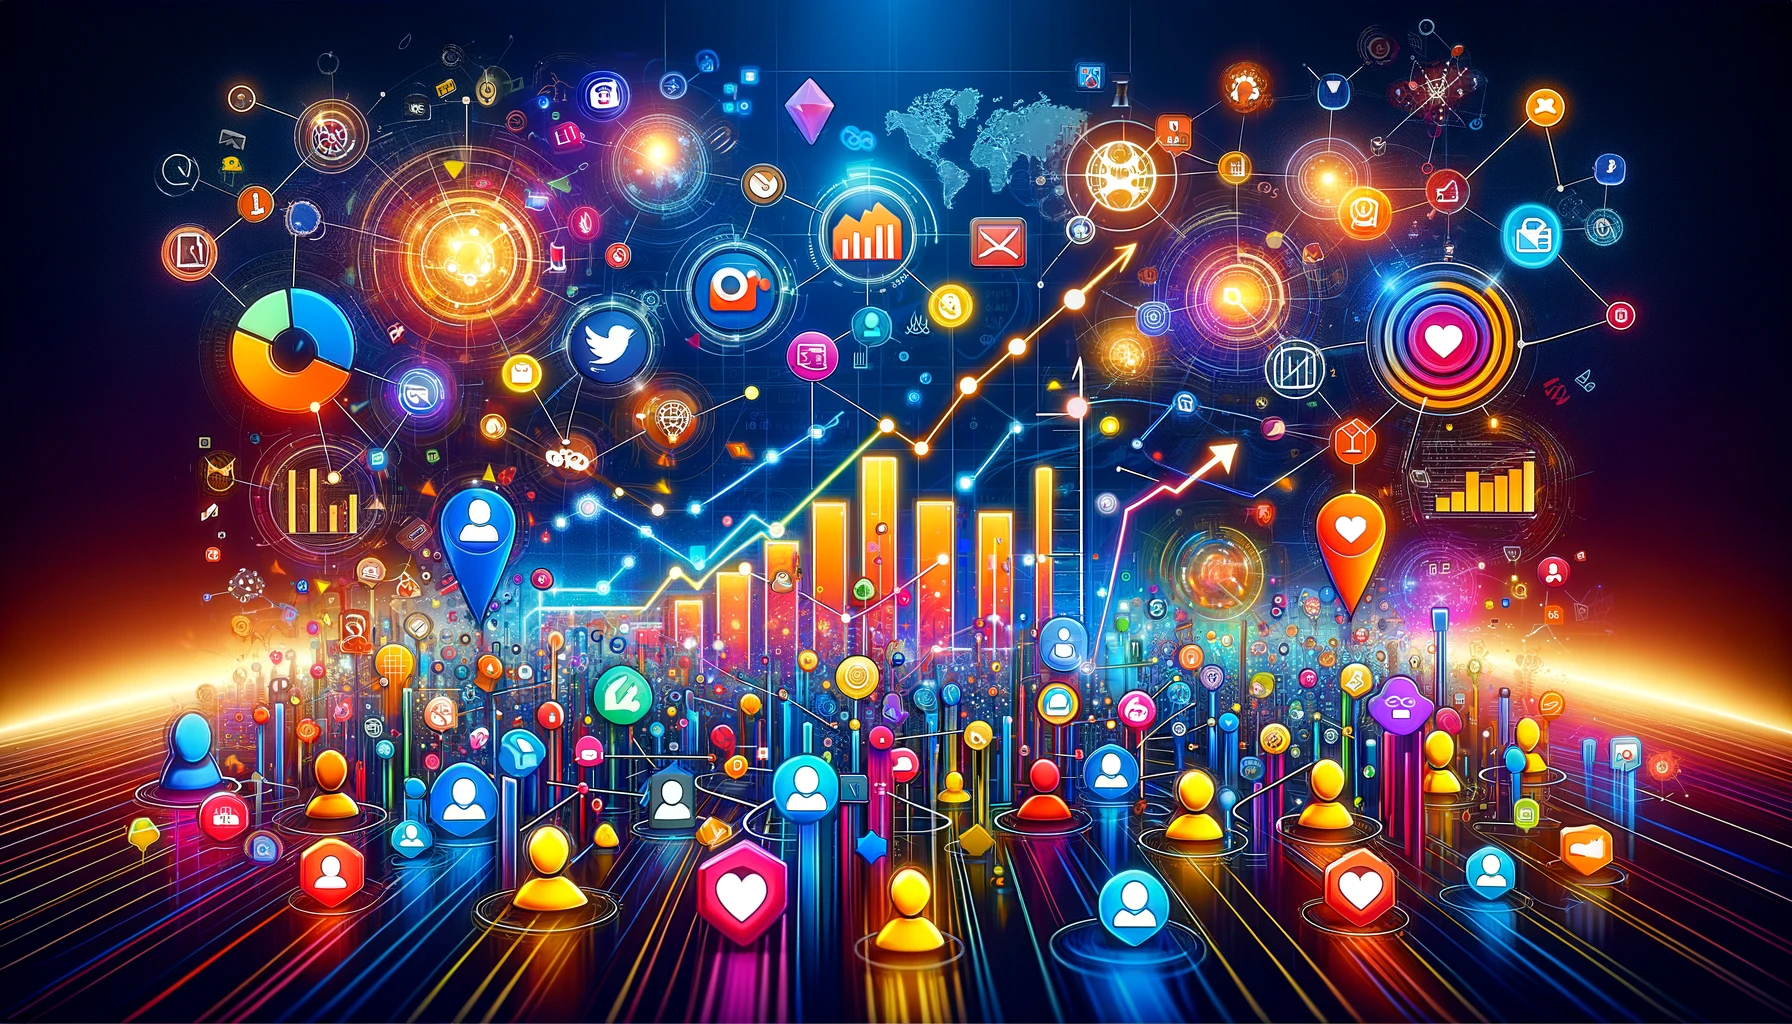 Illustration of Social Media Metrics with vibrant elements like graphs, user icons, and social media symbols, depicting the evaluation of reach, engagement, and conversions. Subtitle: Unlocking the Secrets of Social Media Metrics